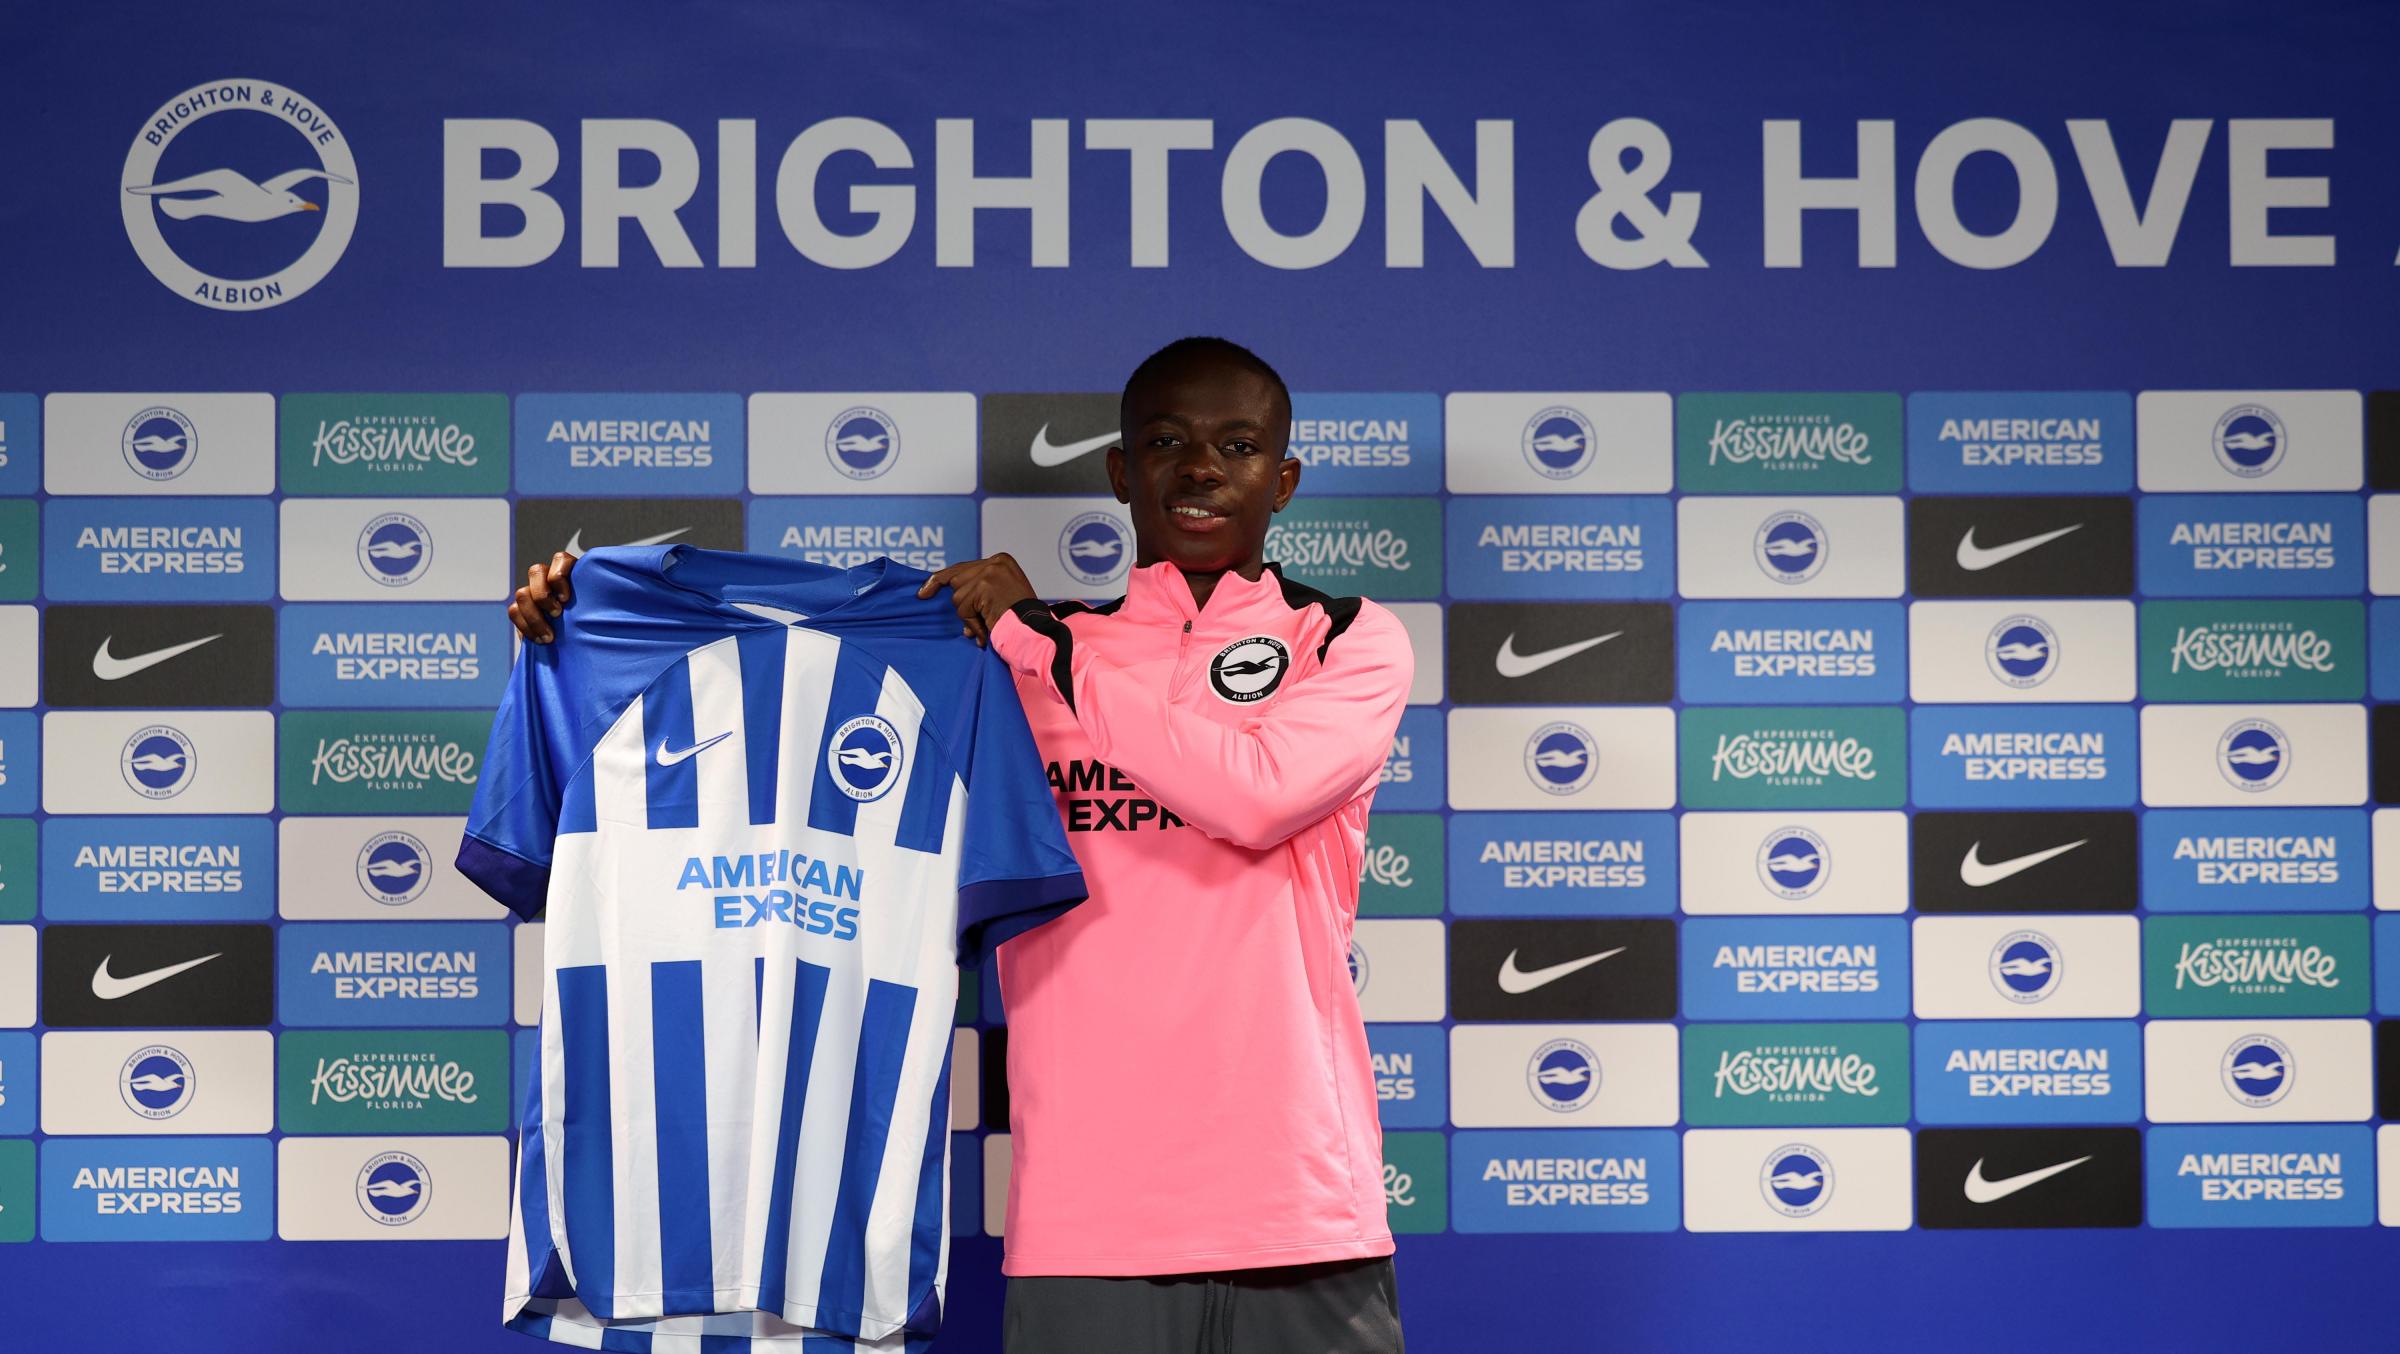 What can Brighton expect from Malick Yalcouye?